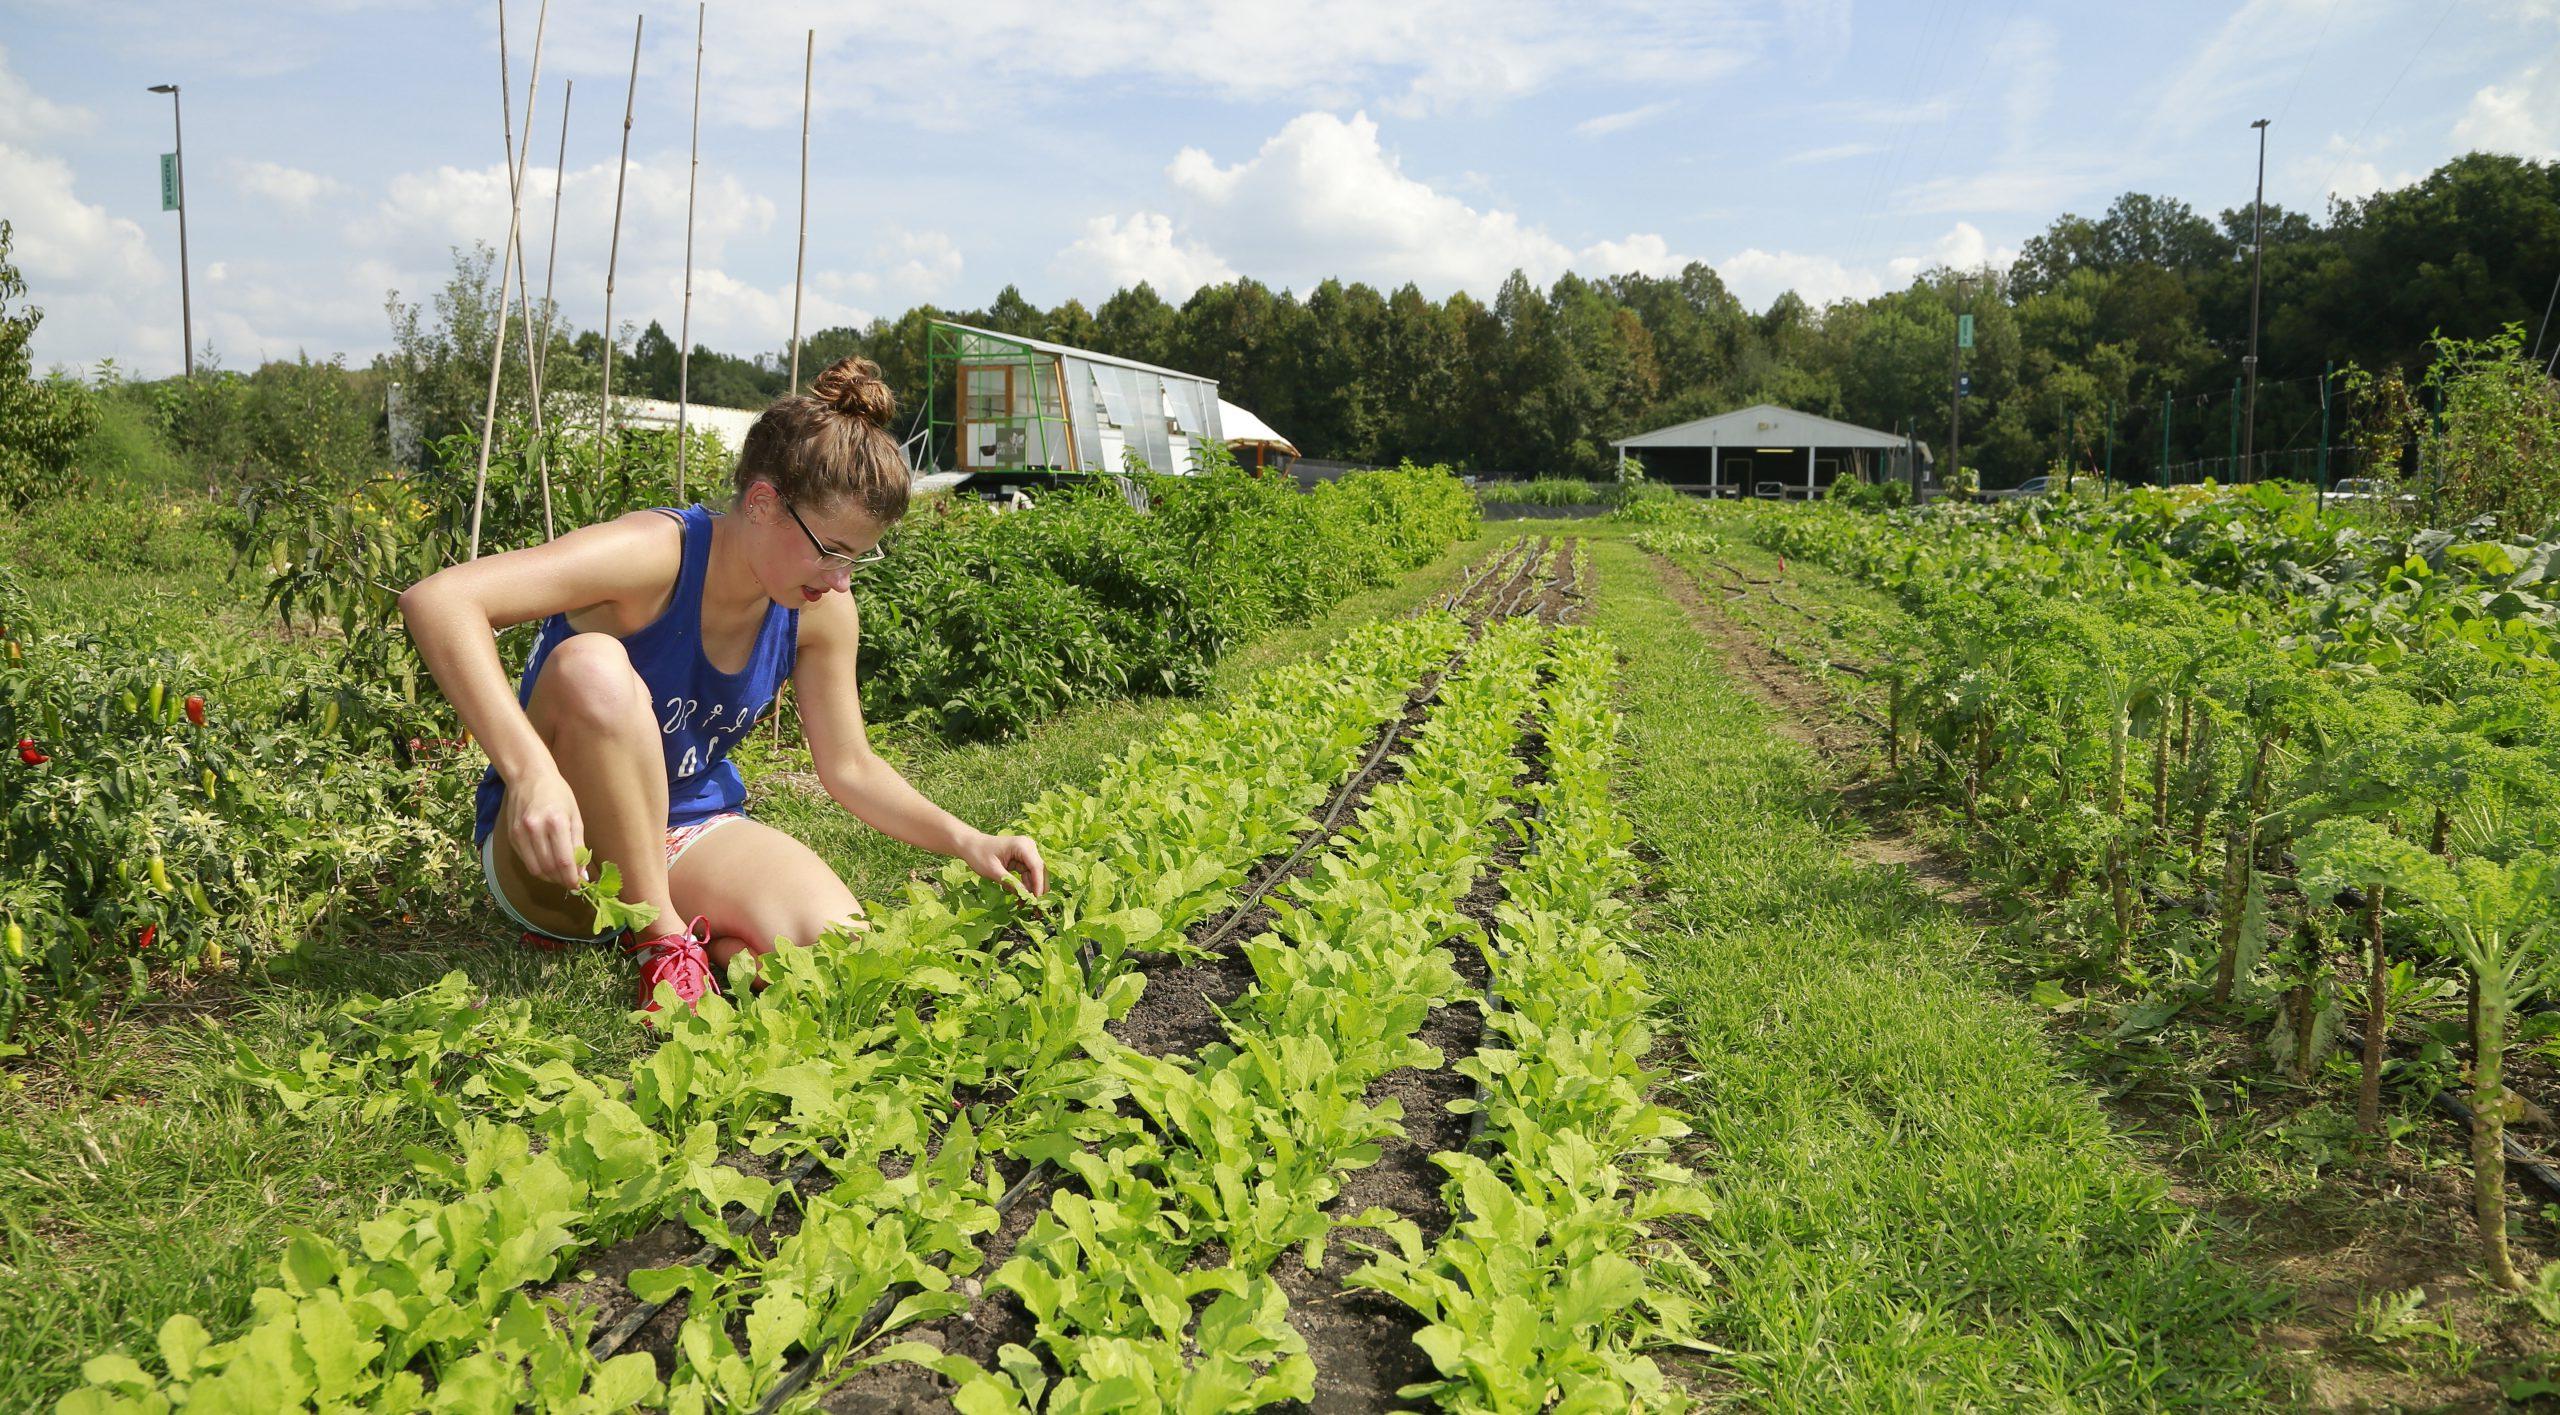 Marissa Byers at The Farm at Butler checking on some plants